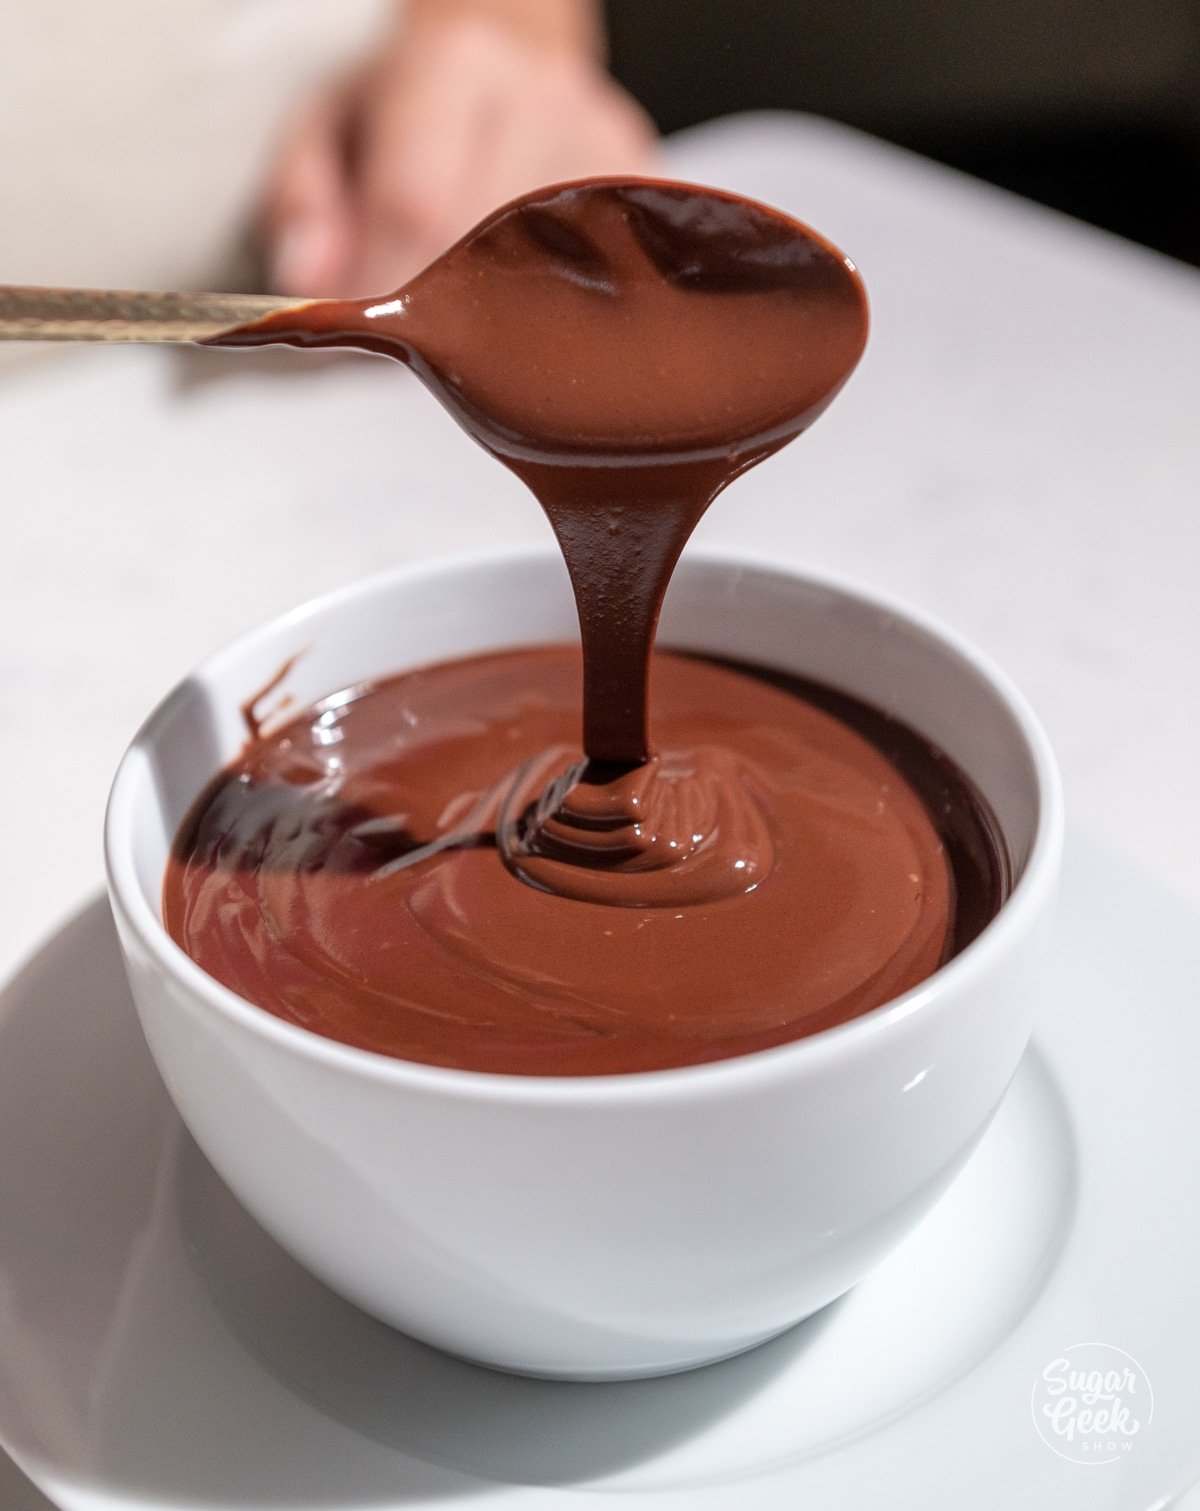 soft chocolate ganache drizzling from a spoon into a bowl